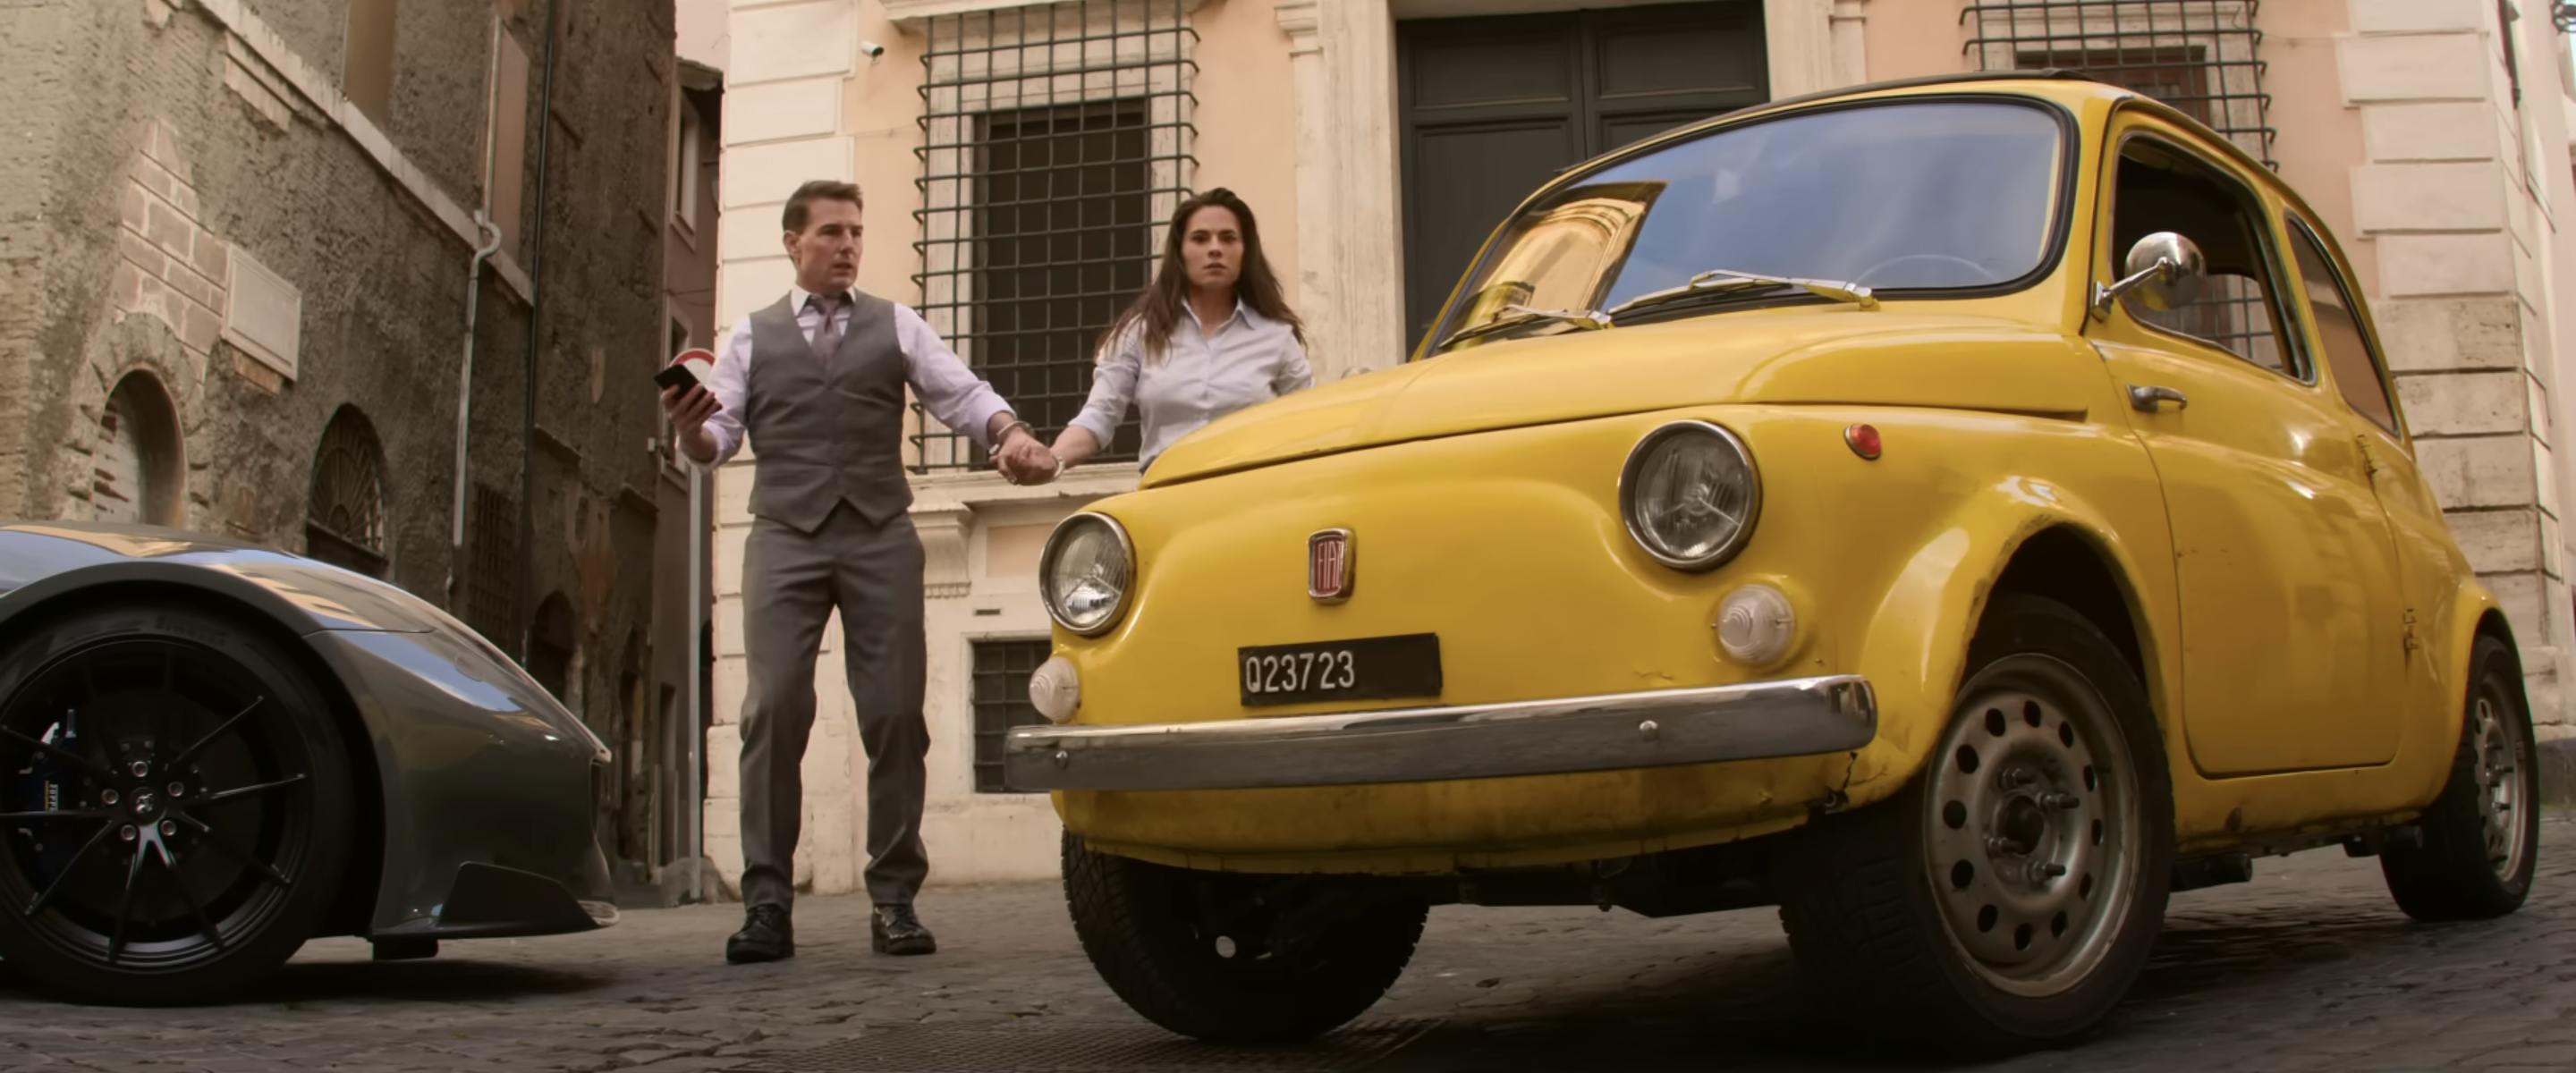 Mission Impossible yellow fiat 500 tom cruise